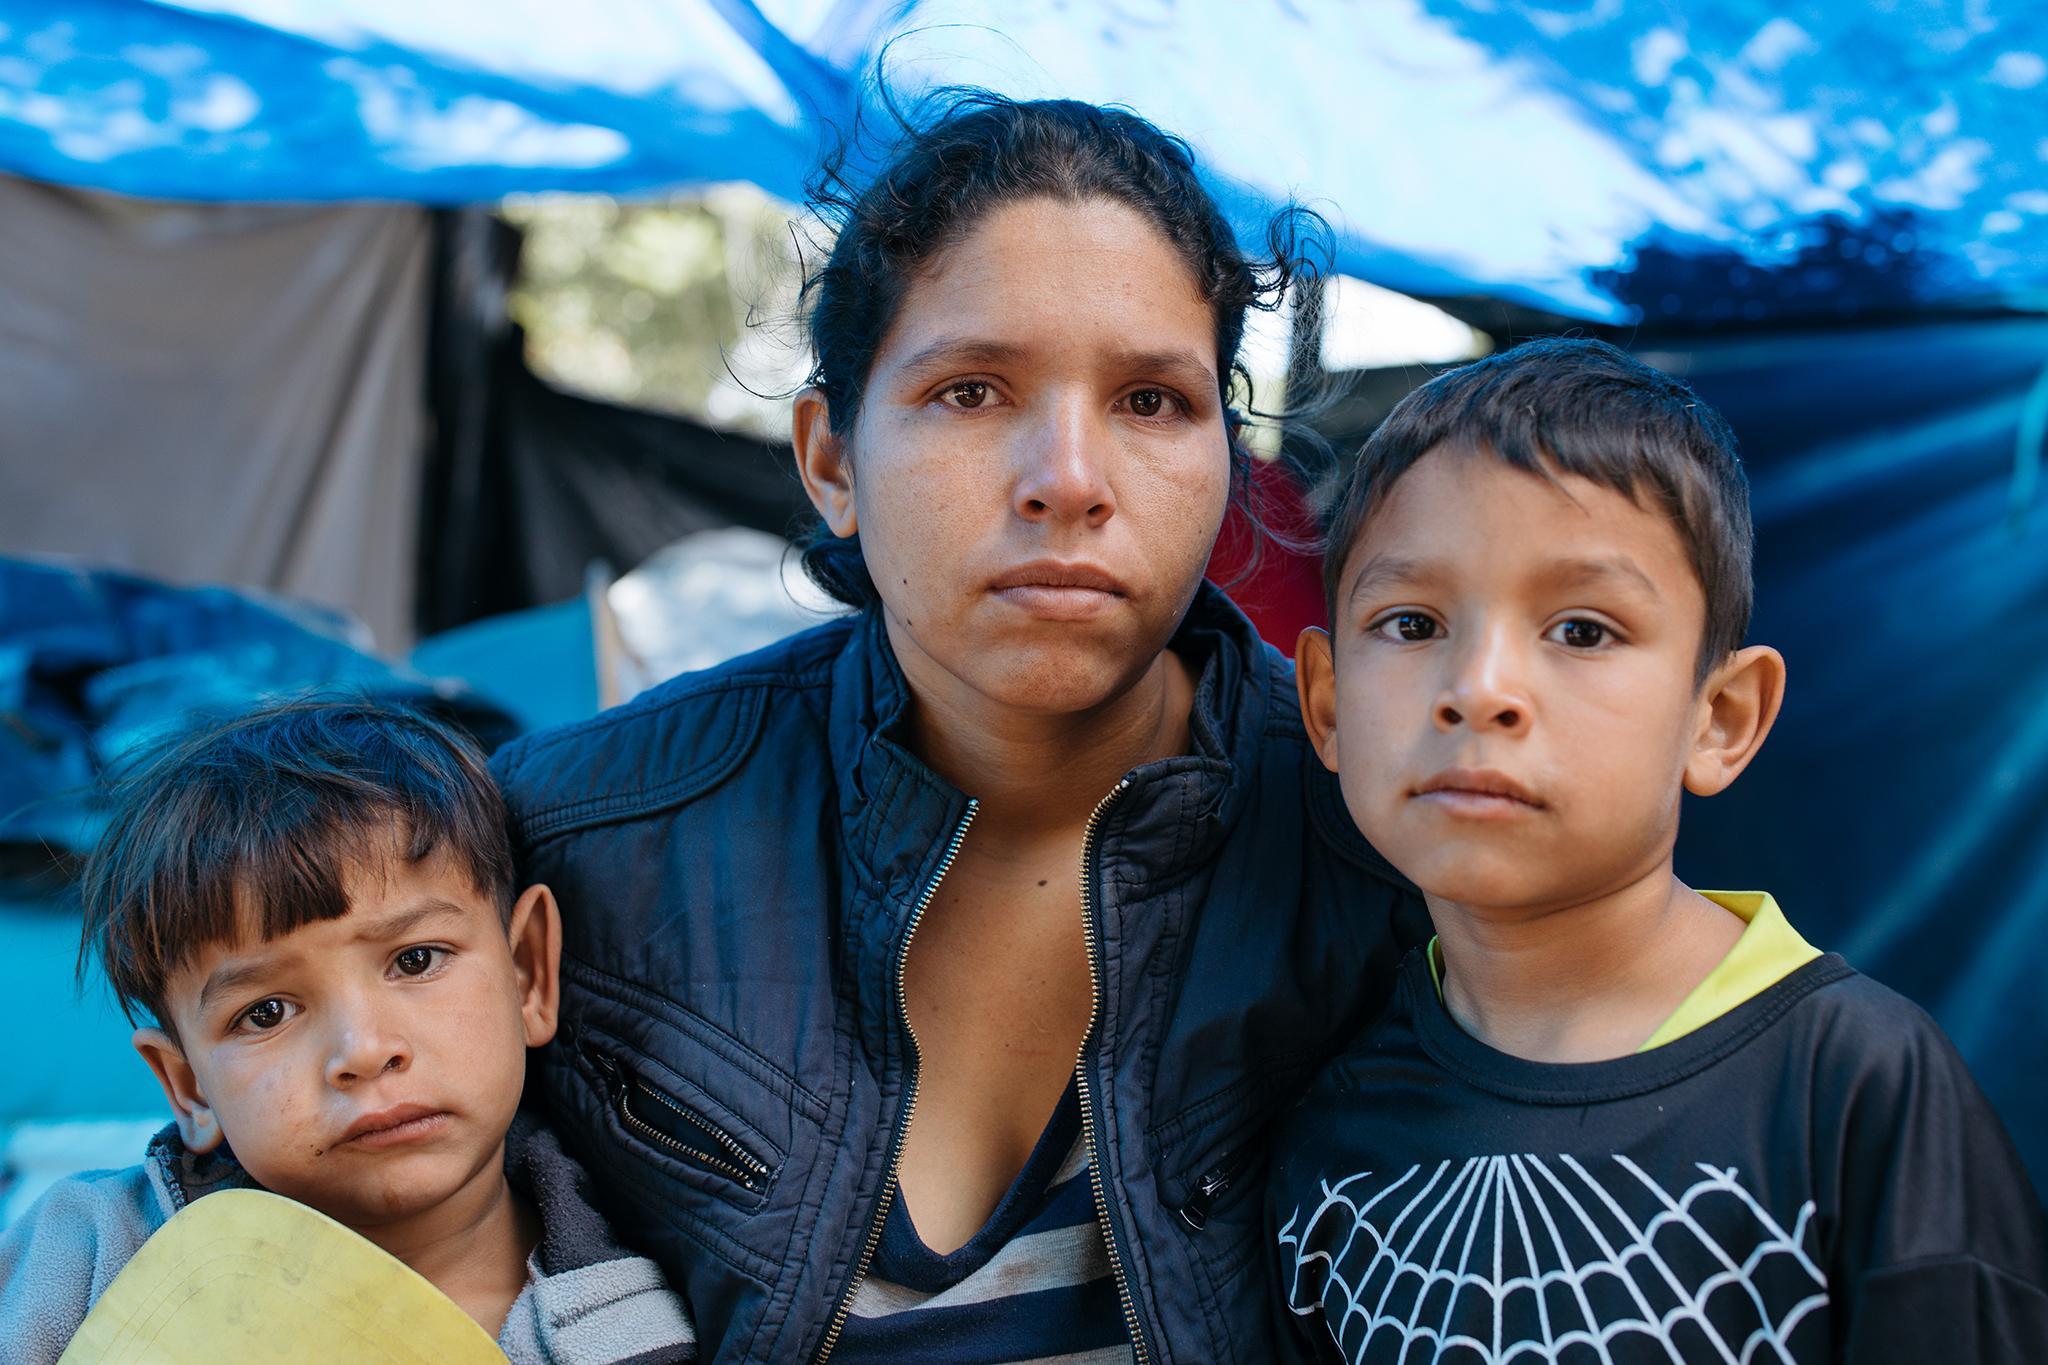 Nazareth Pirloiria and her partner and children walked for 20 days through Columbia to get to the Carcelen bus terminal, where they are now living in a makeshift shelter (Padding Dowling)